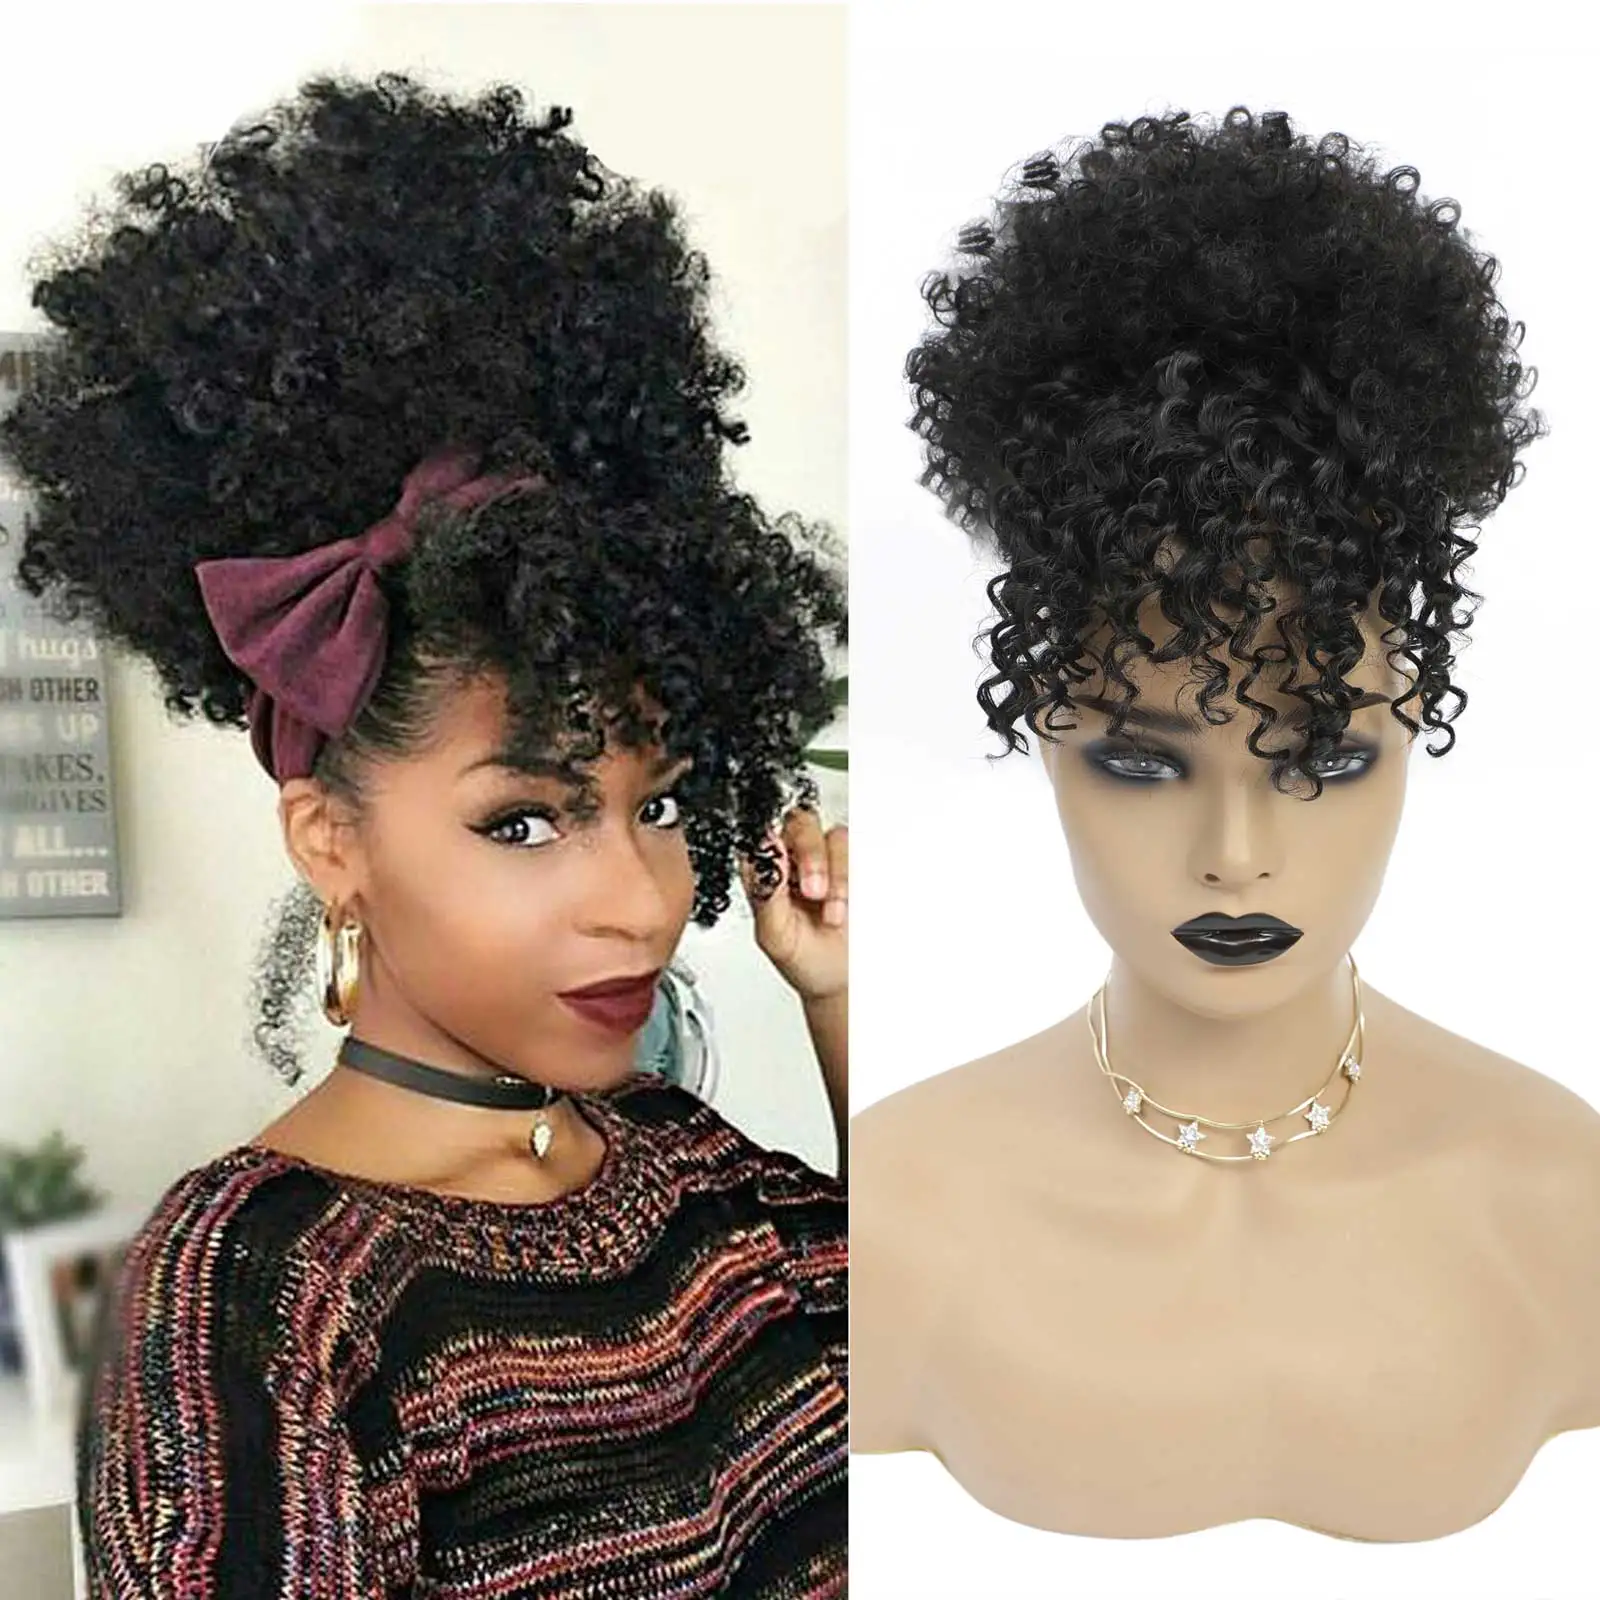 

G&T Wig Afro High Puff Hair Bun Drawstring Ponytail With Bangs Short Kinky Curly Pineapple Hair Extensions for Black Women, Multi color